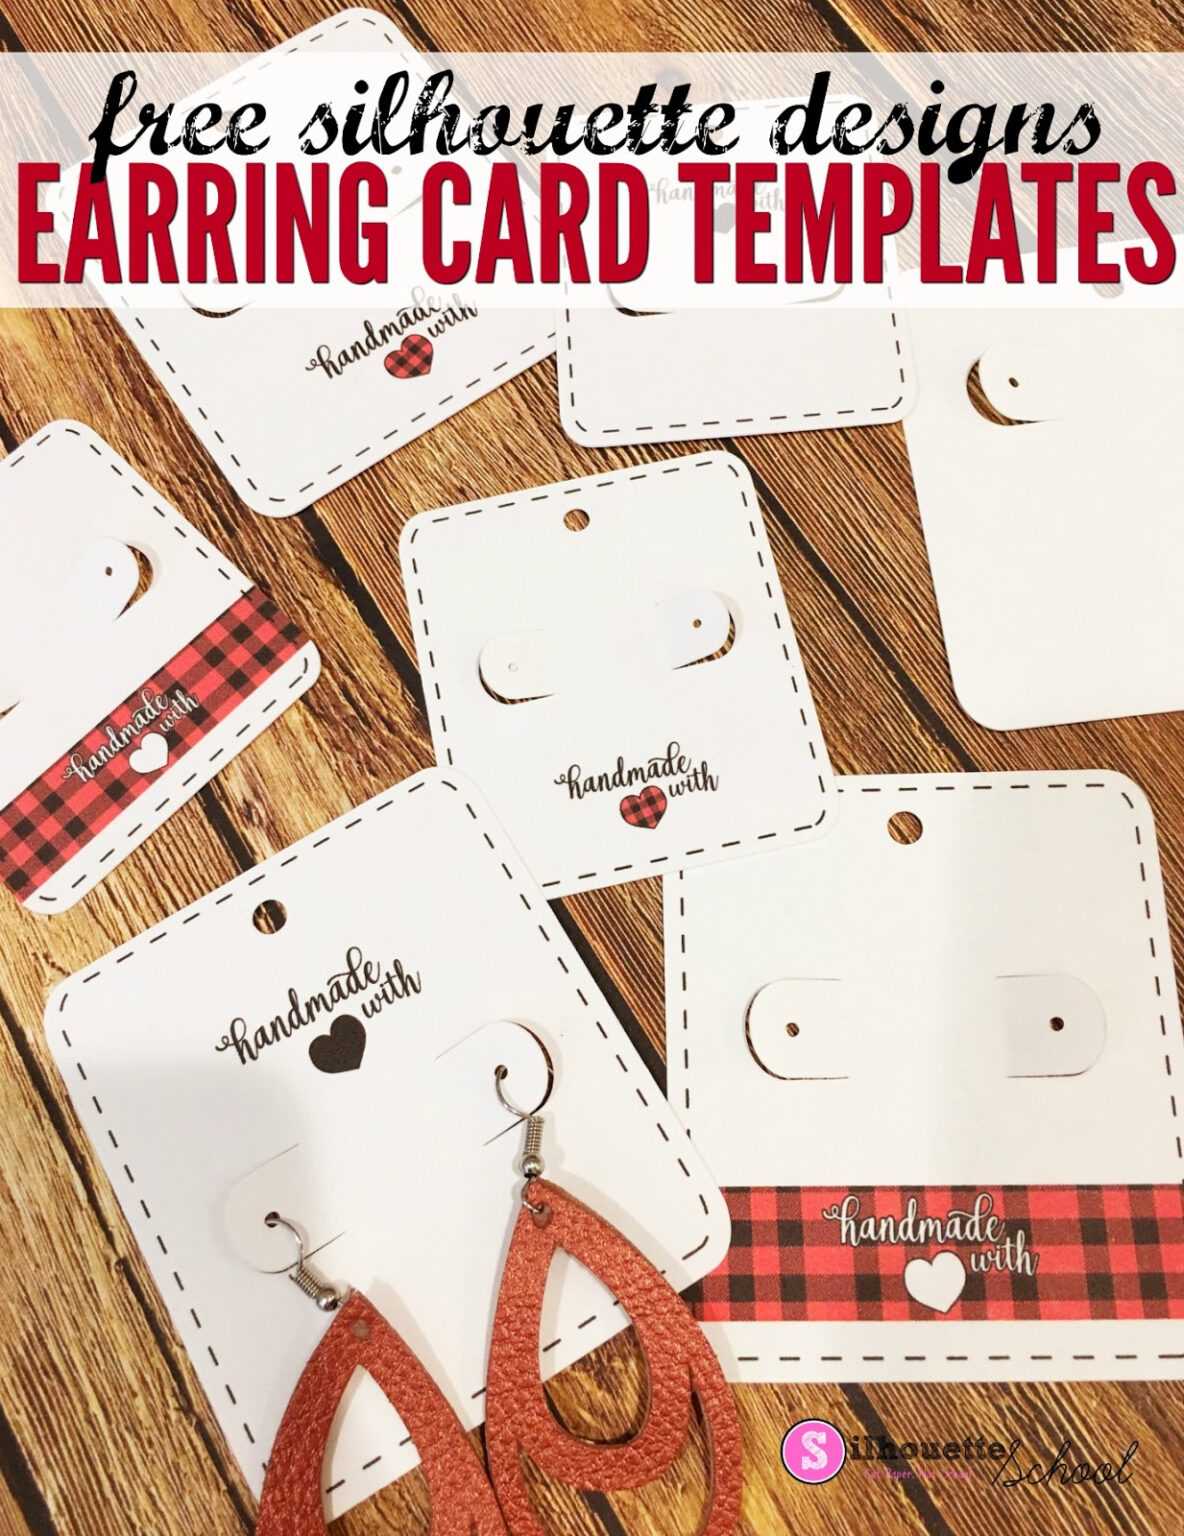 Free Silhouette Earring Card Templates (Set Of 8 with Free Svg Card